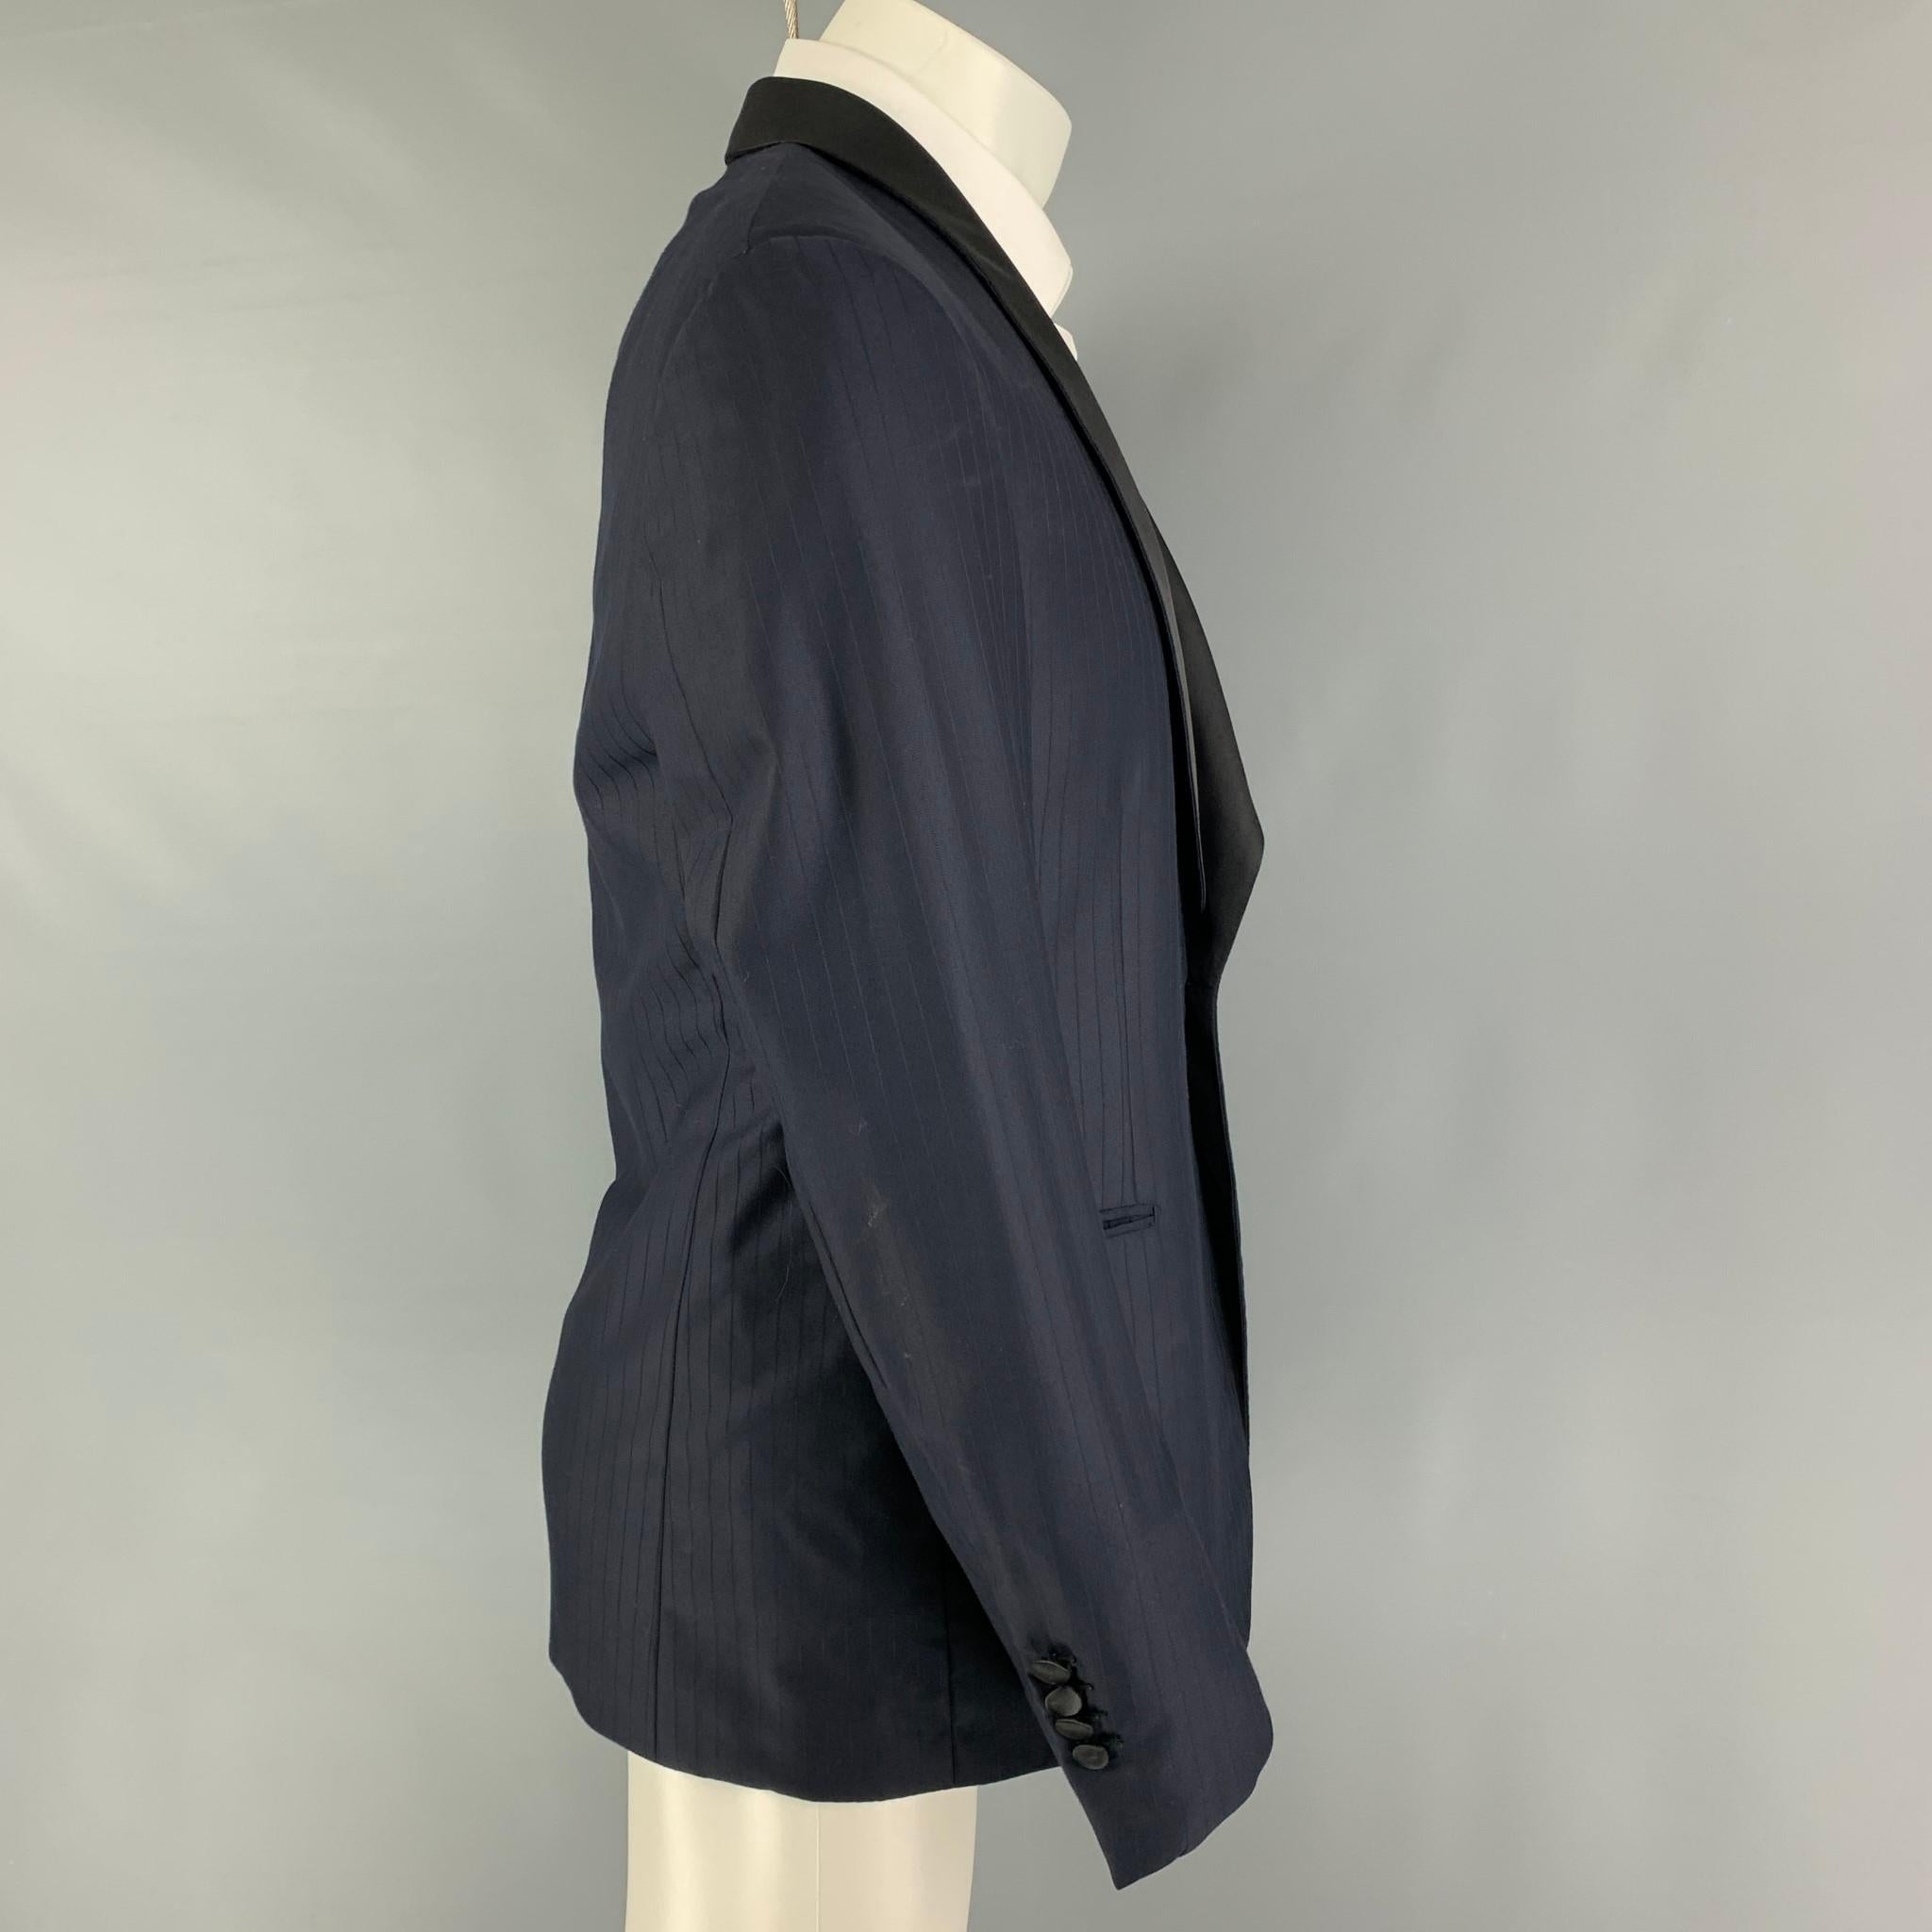 BRIONI tuxedo sport coat comes in a navy stripe wool with a full liner featuring a shawl collar, slit pockets, and a single button closure. 

Excellent Pre-Owned Condition.
Marked: 50 R

Measurements:

Shoulder: 17.5 in.
Chest: 40 in.
Sleeve: 27